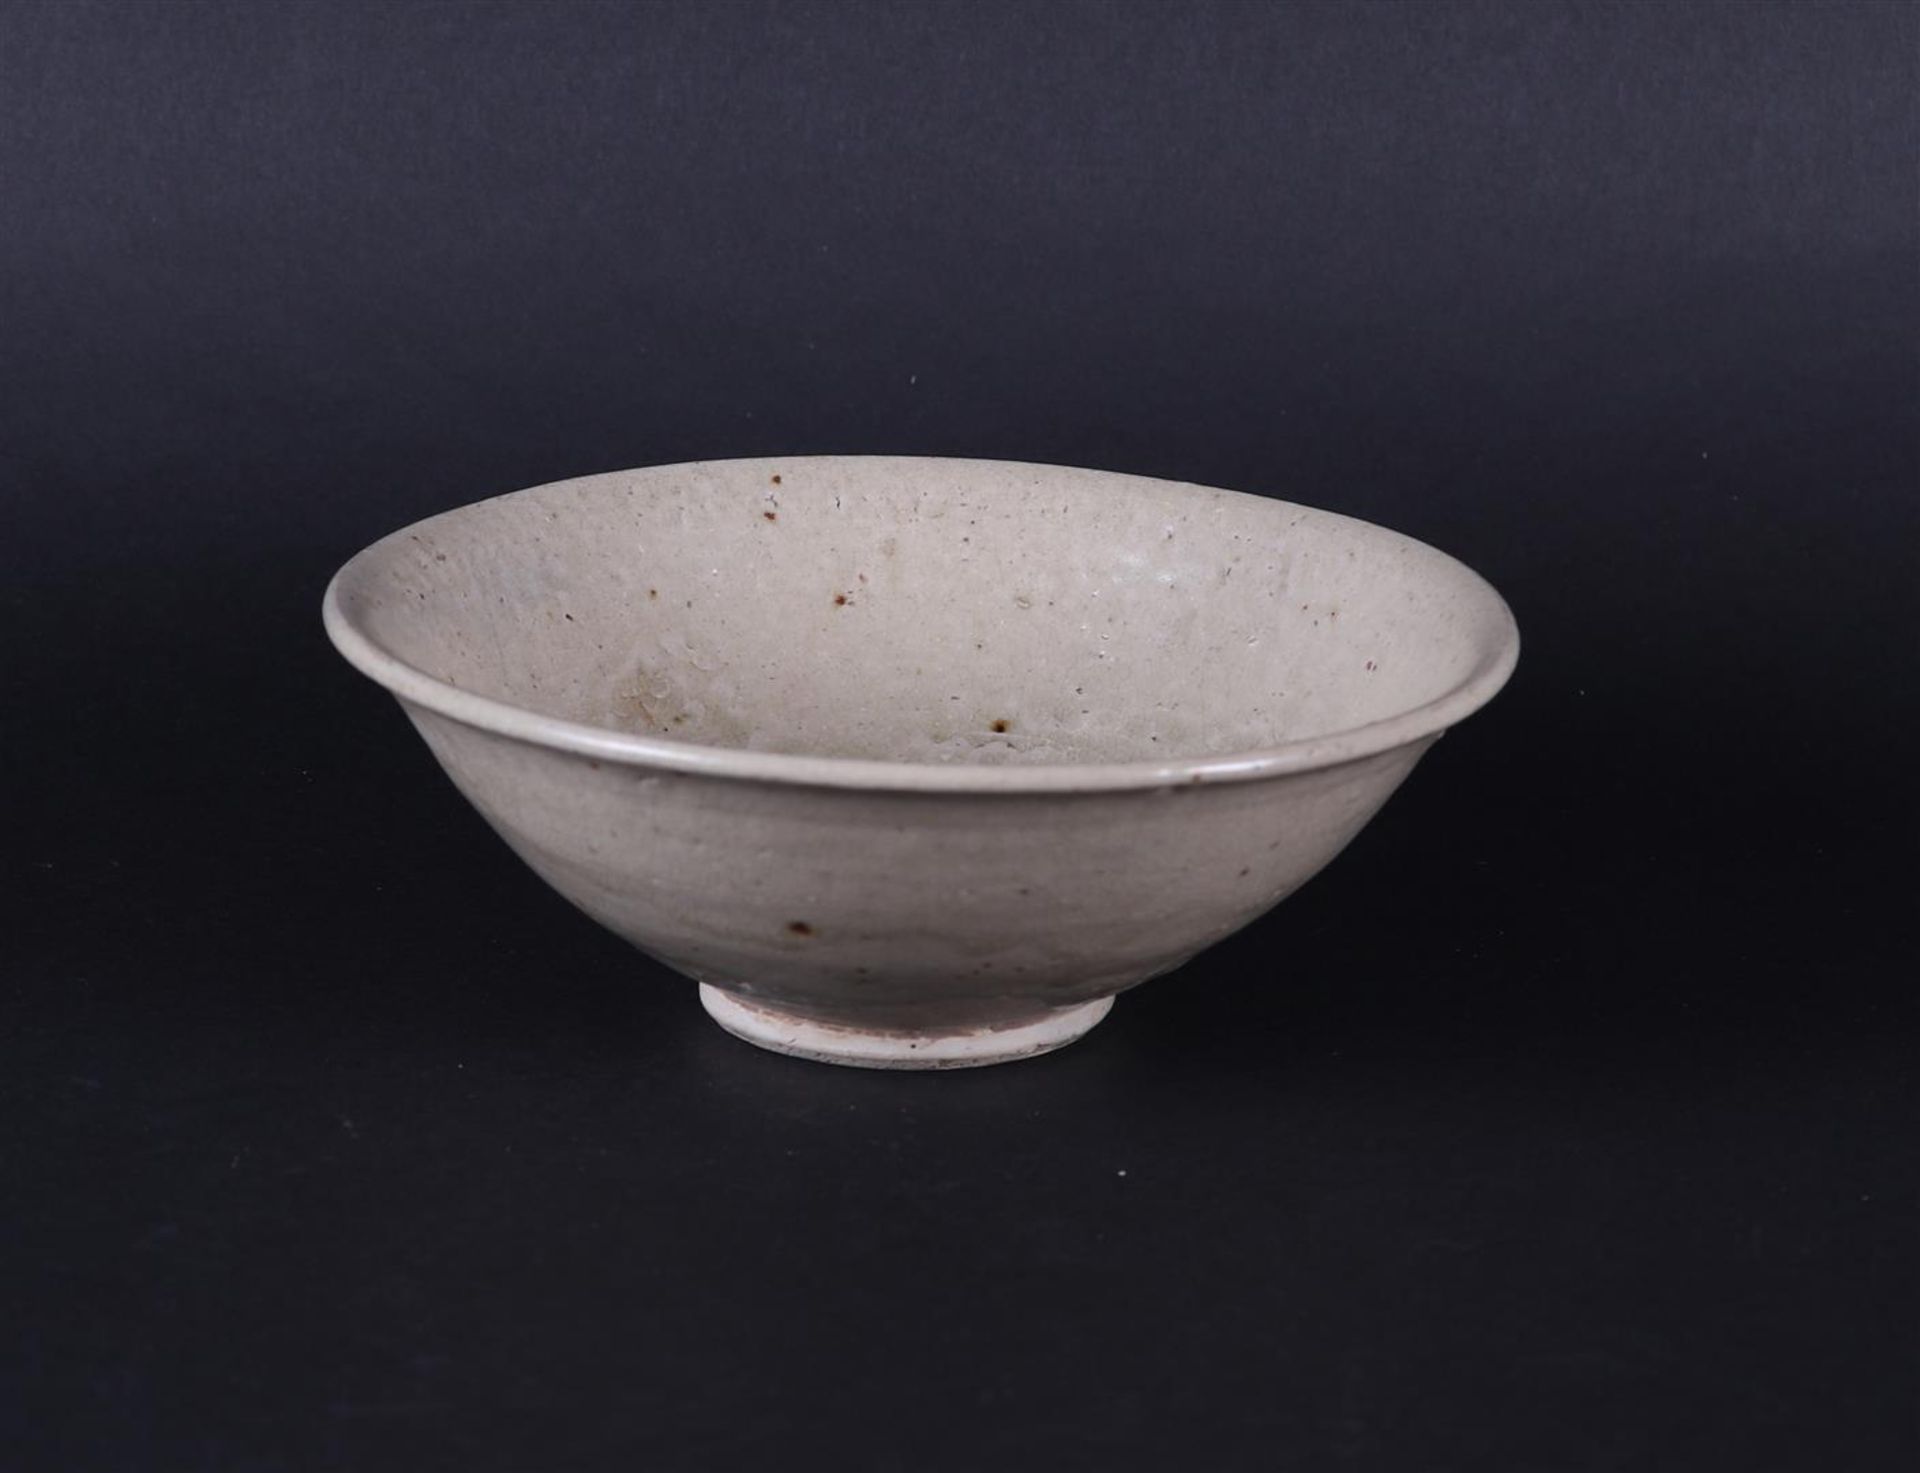 A gray Celadon bowl with ribbed center relief decoration. China, Early Ming period.